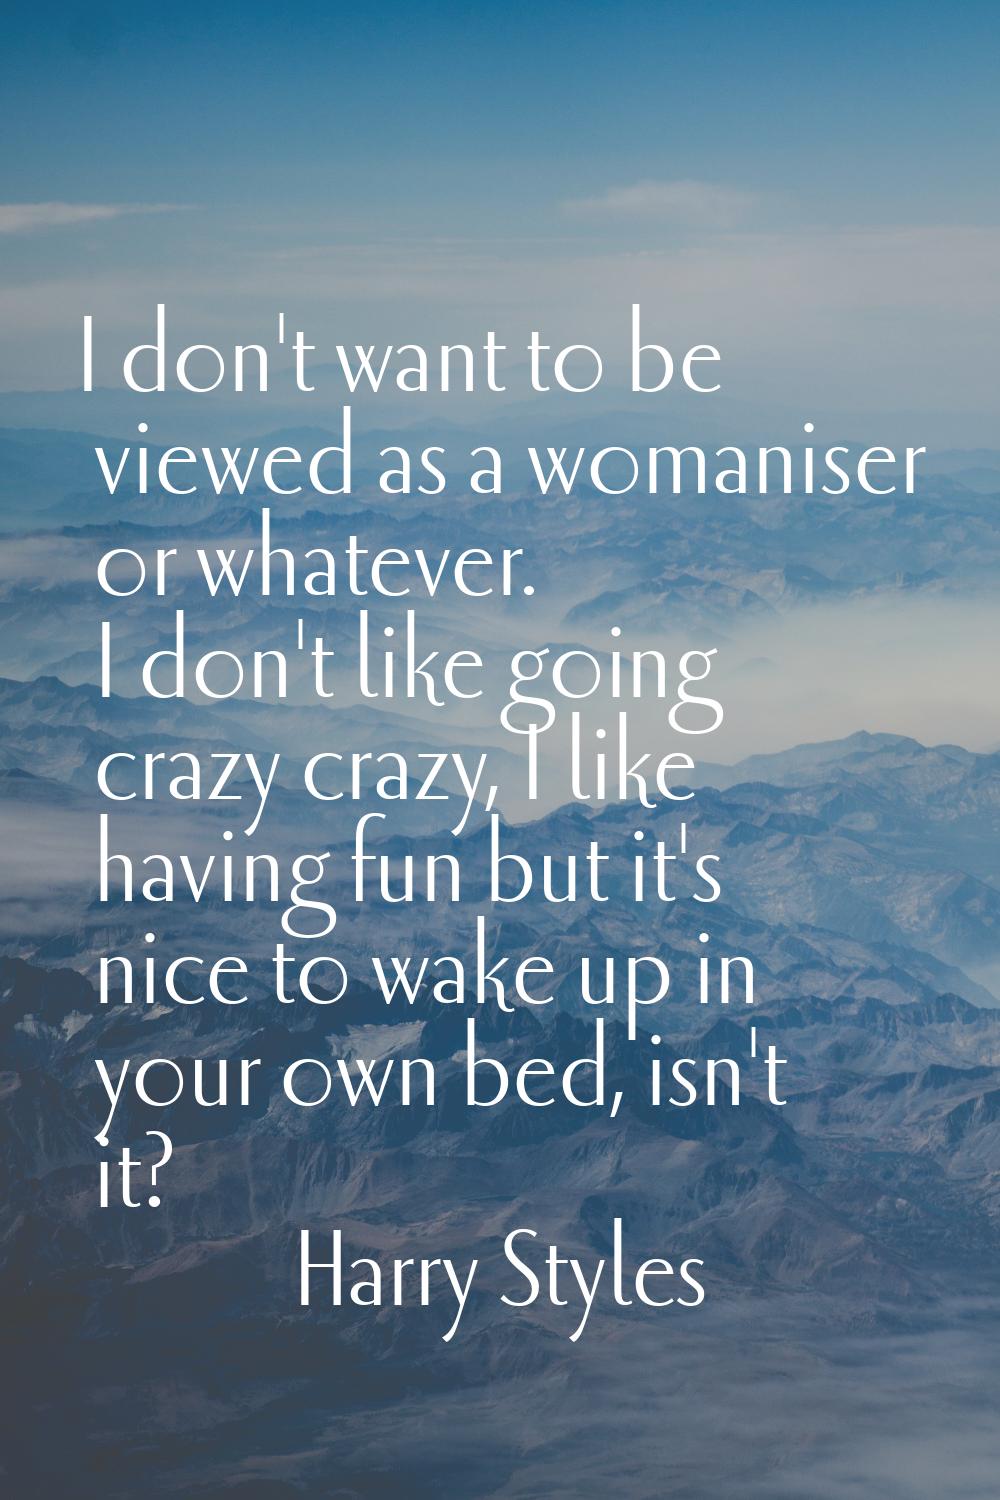 I don't want to be viewed as a womaniser or whatever. I don't like going crazy crazy, I like having